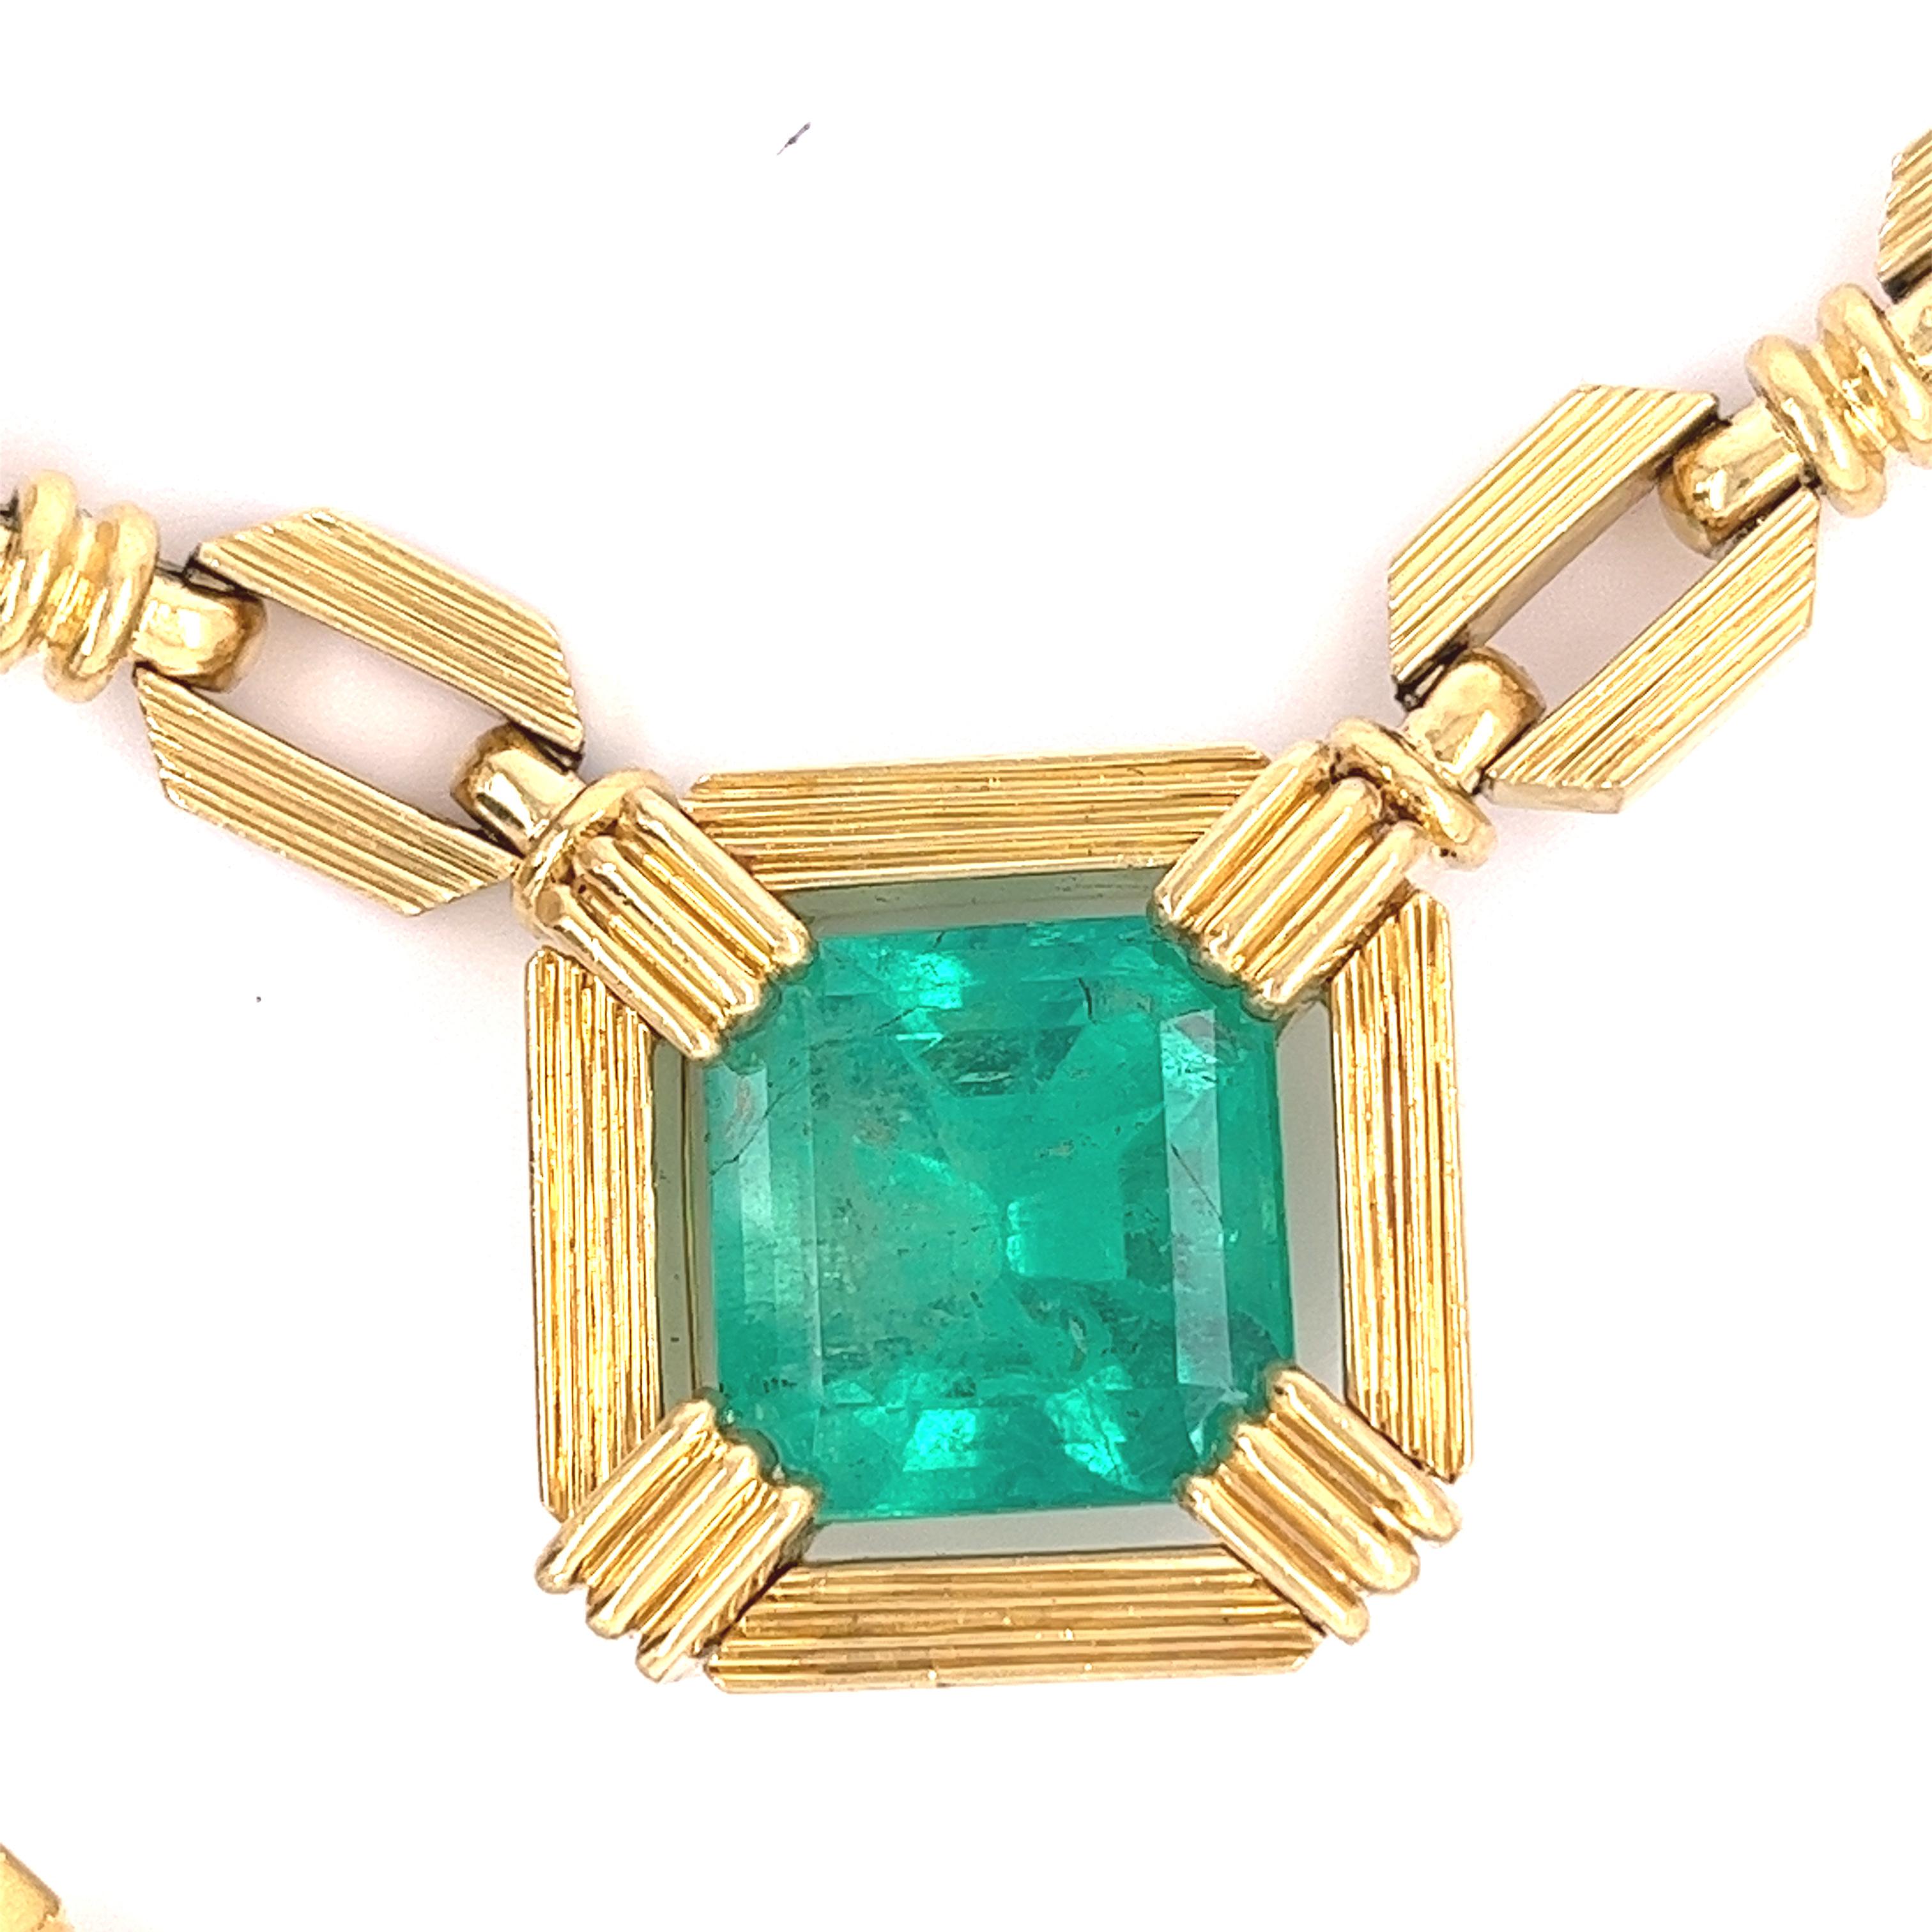 Emerald Cut Henry Dunay Signed 19.48 Carat Colombian Emerald Necklace in 18k Yellow Gold For Sale